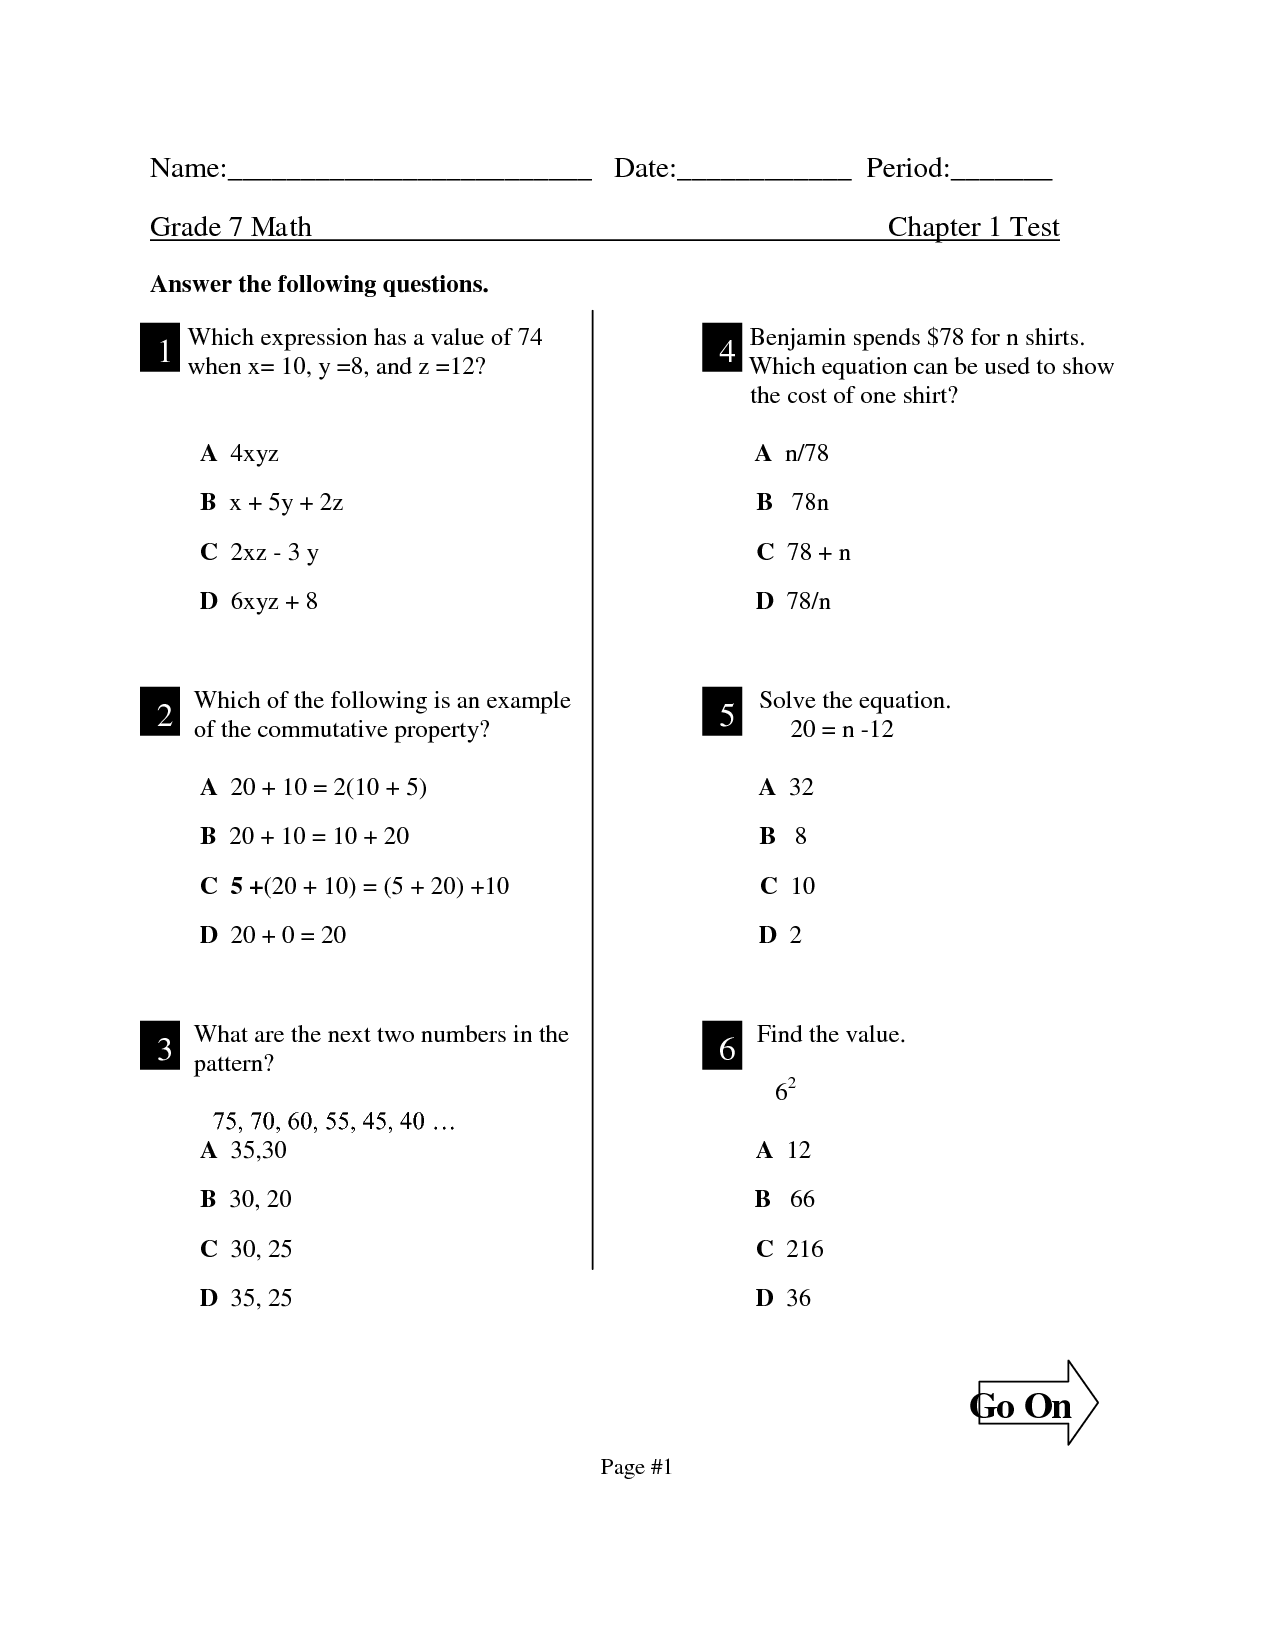 10-best-images-of-7th-grade-math-worksheets-with-answer-key-7th-grade